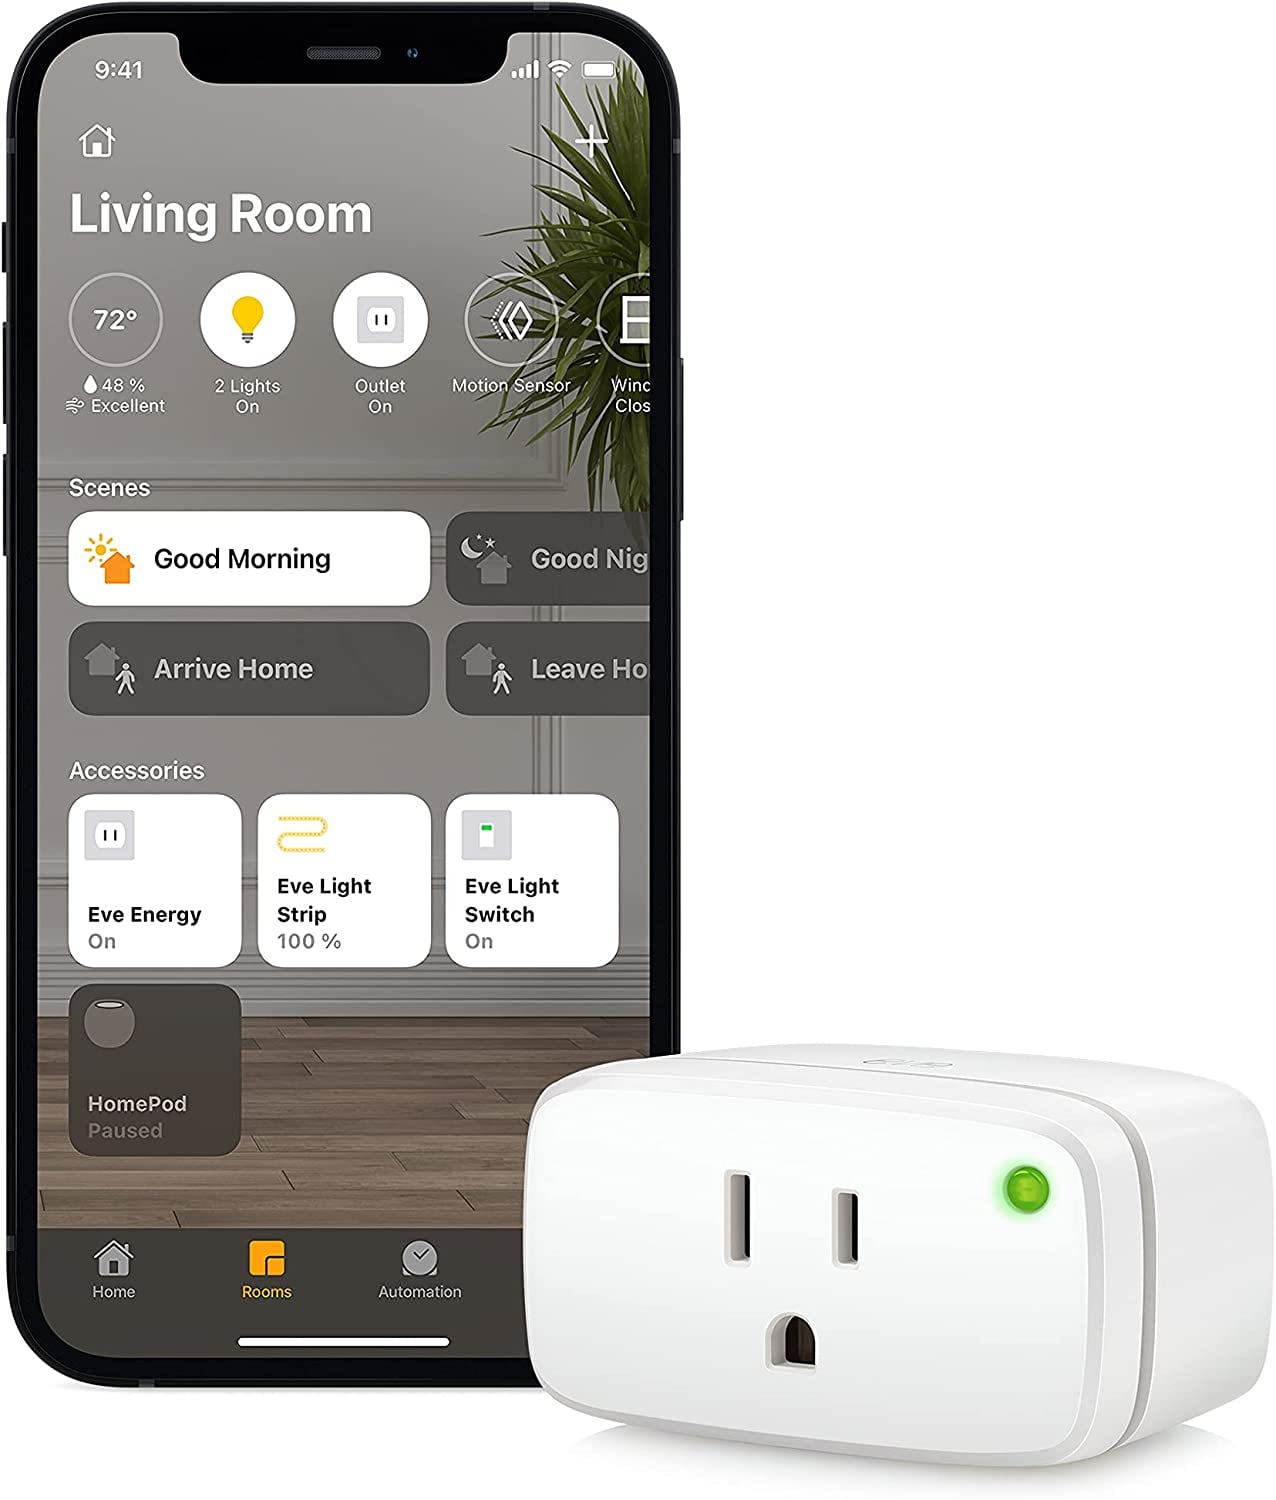 10 Smart Home Gadgets That Will Make Your Life Easier - Electronic House